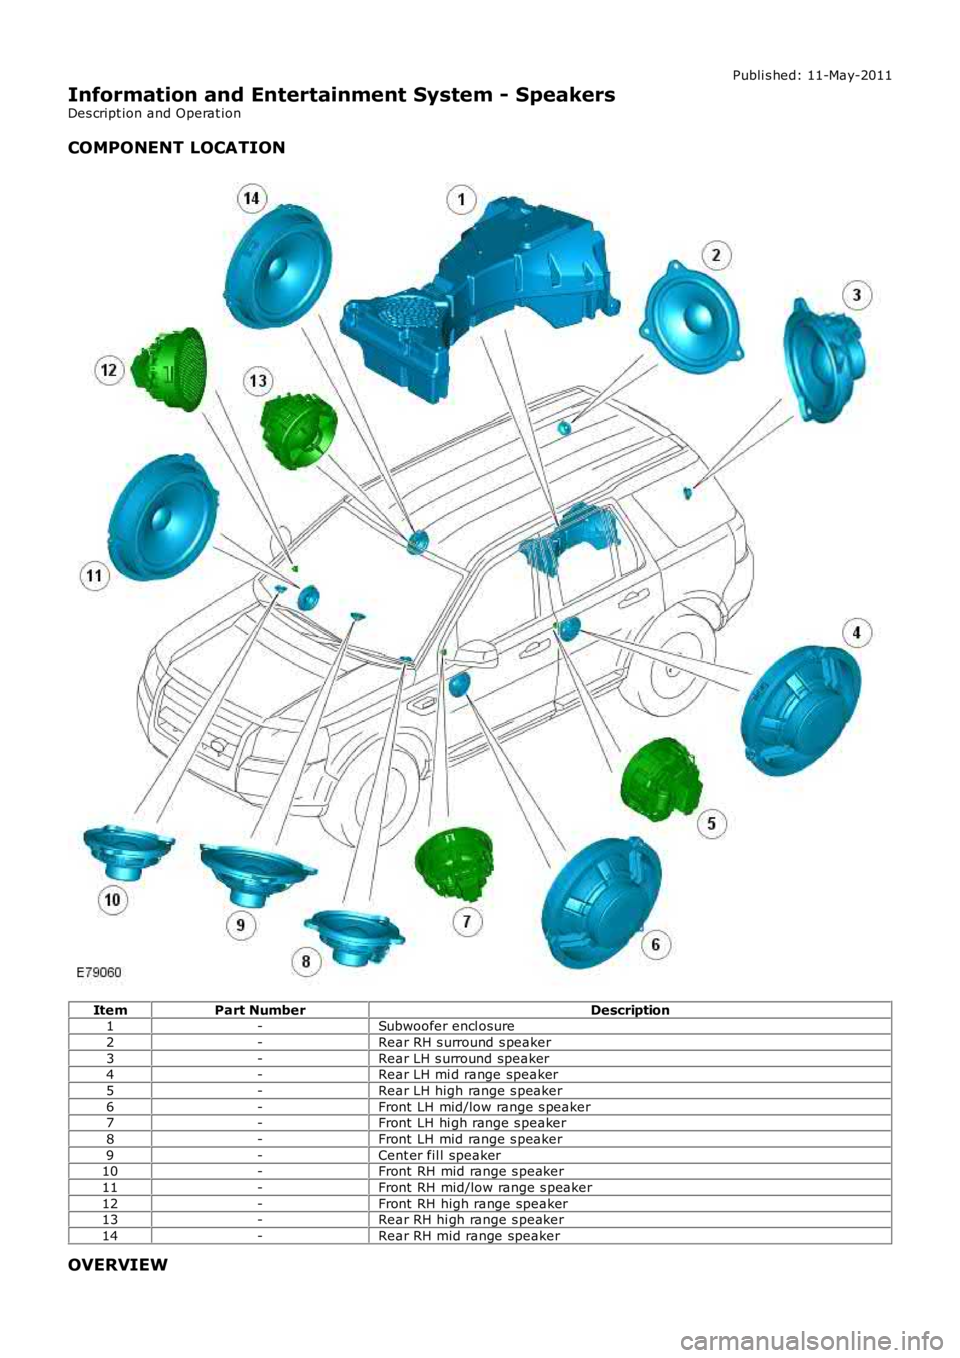 LAND ROVER FRELANDER 2 2006  Repair Manual Publi s hed: 11-May-2011
Information and Entertainment System - Speakers
Des cript ion and Operat ion
COMPONENT LOCATION
ItemPart NumberDescription1-Subwoofer encl osure
2-Rear RH s urround s peaker
3